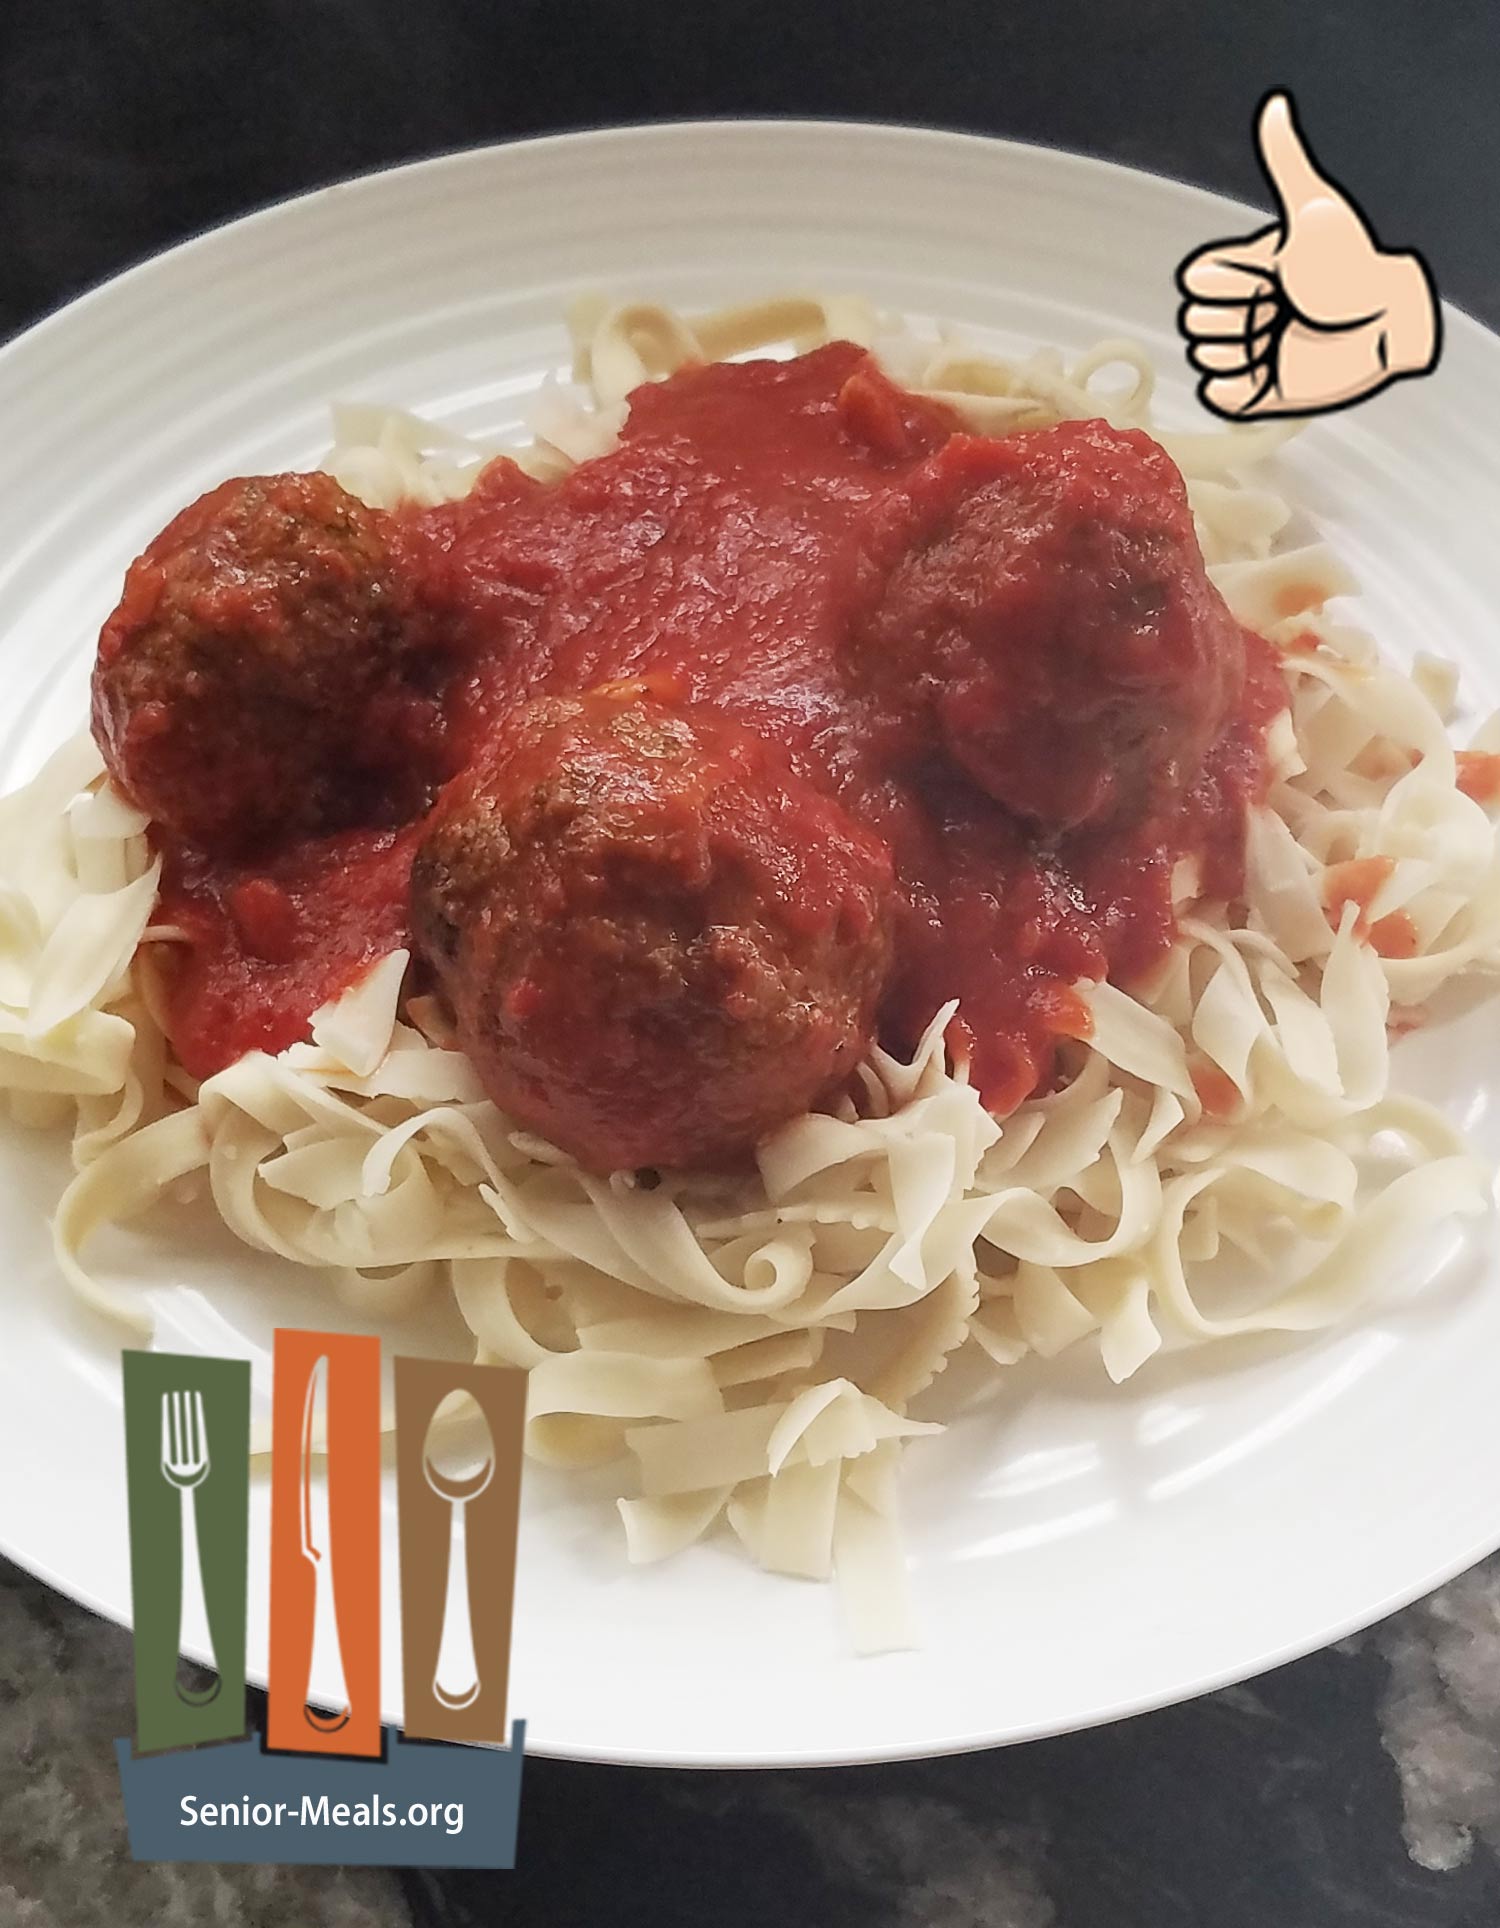 Zero Carb Fettuccini with Meatballs and Sauce